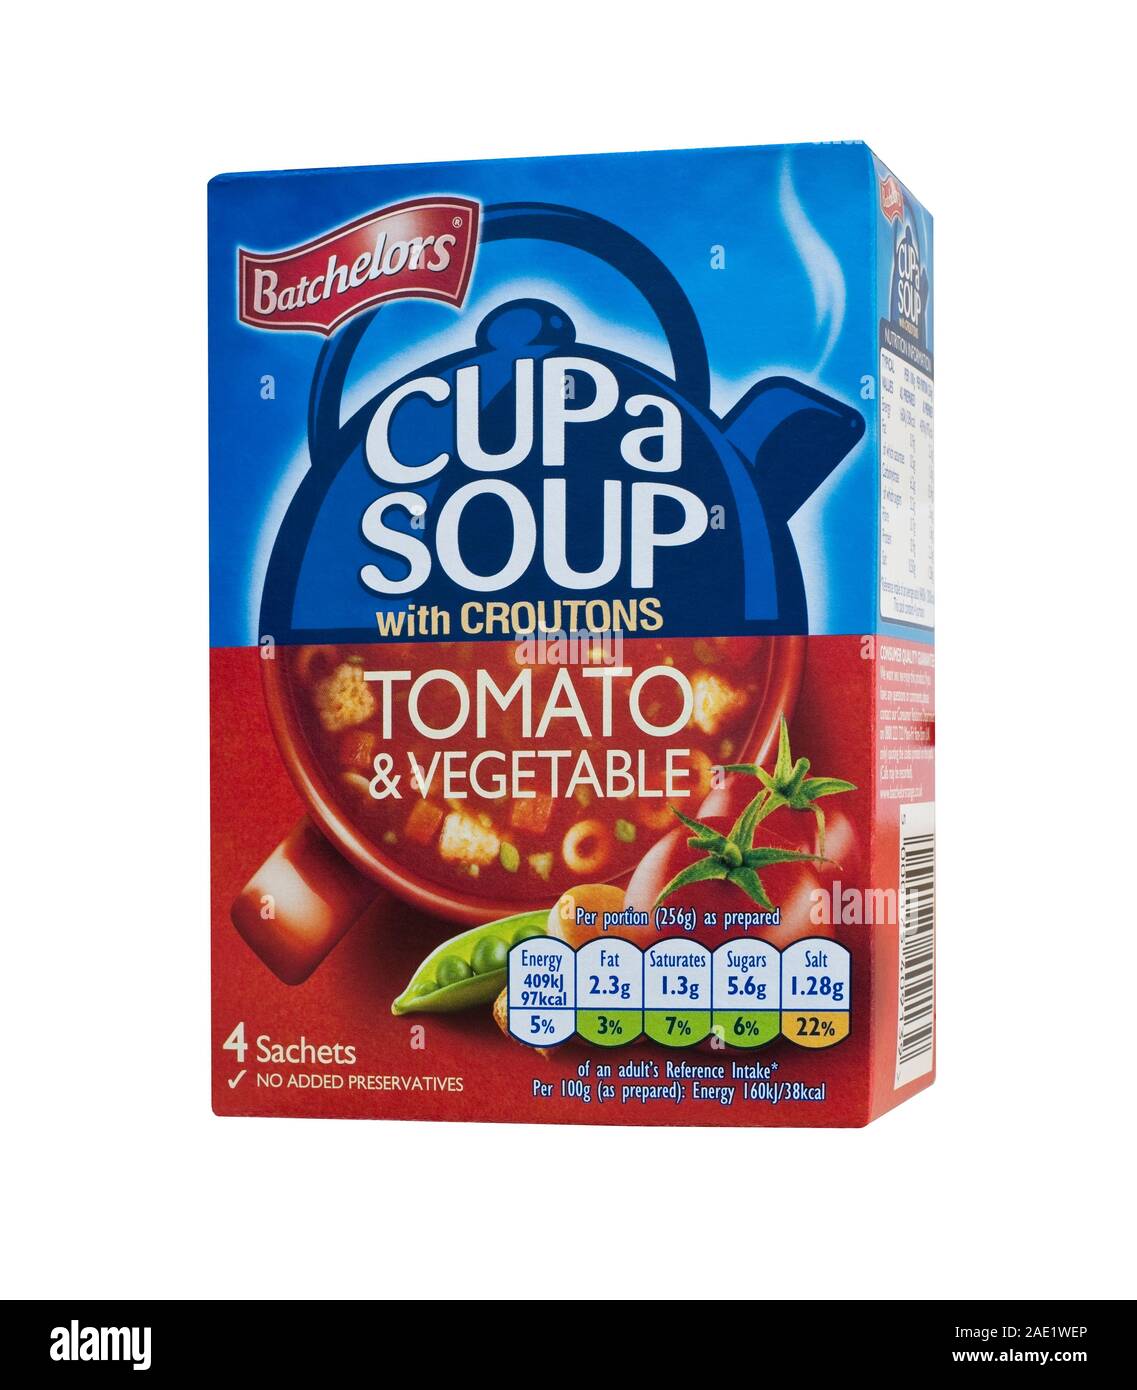 Batchelors cup a soup tomato and vegetable with croutons packet box Stock Photo